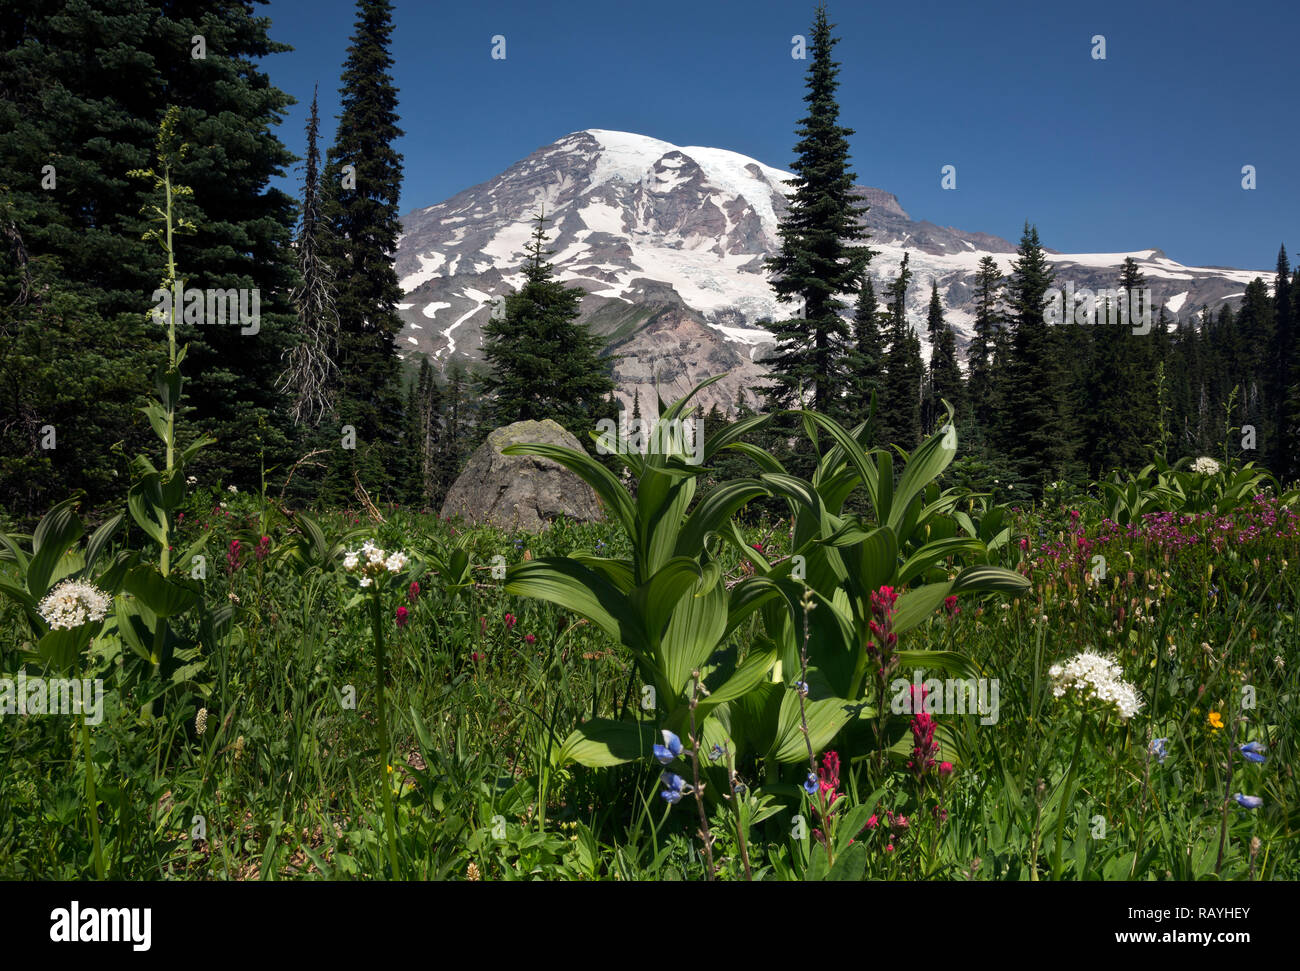 WASHINGTON - Paintbrush, green hellebore, sitka valerian and heather blooming in meadow above Nisqually Vista in Mount Rainier National Park. Stock Photo